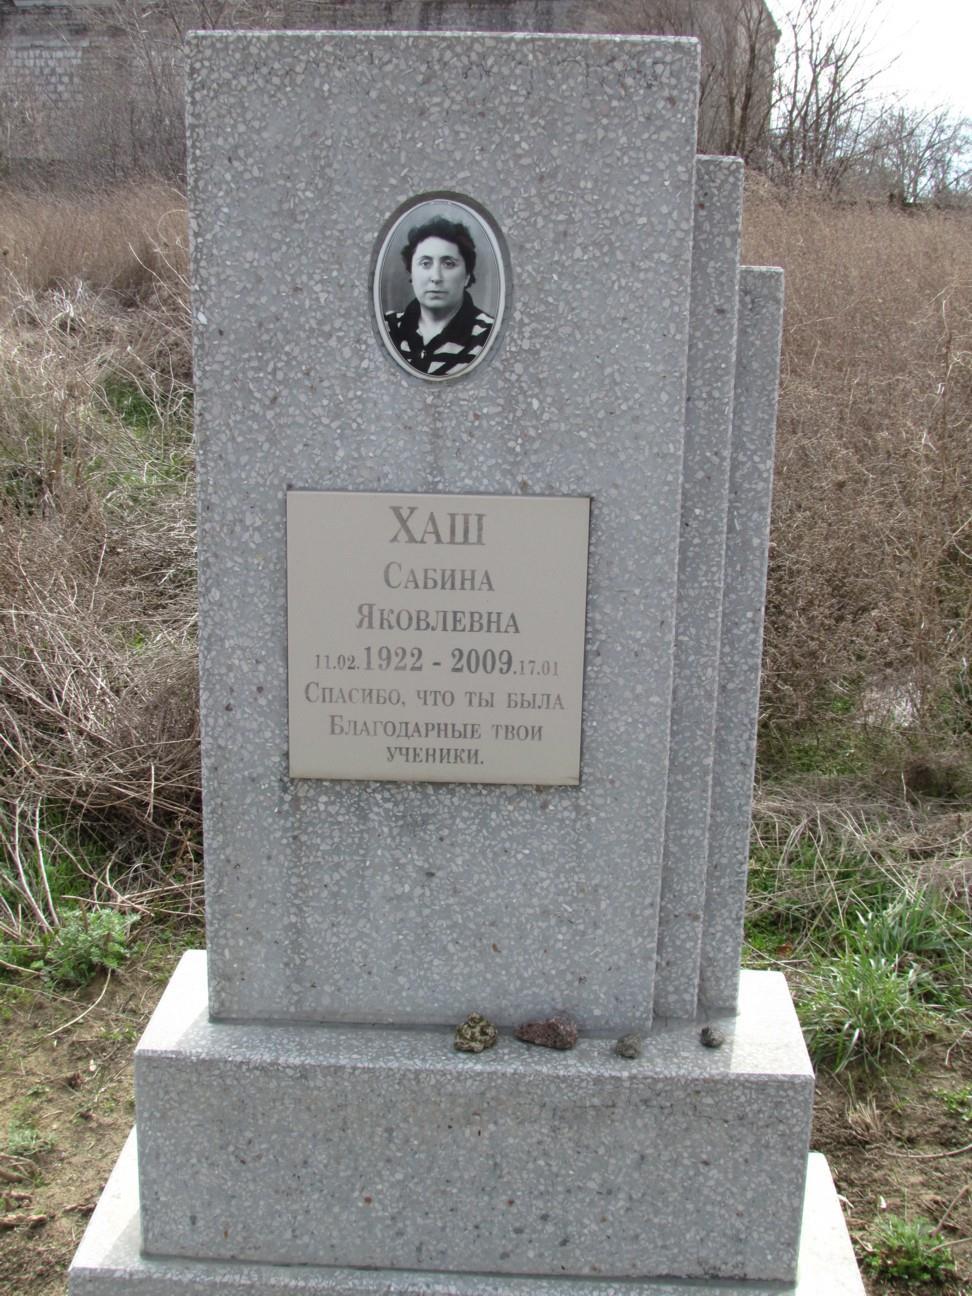 Grave of a teacher Monument erected by her students KHASH Sabina daughter of